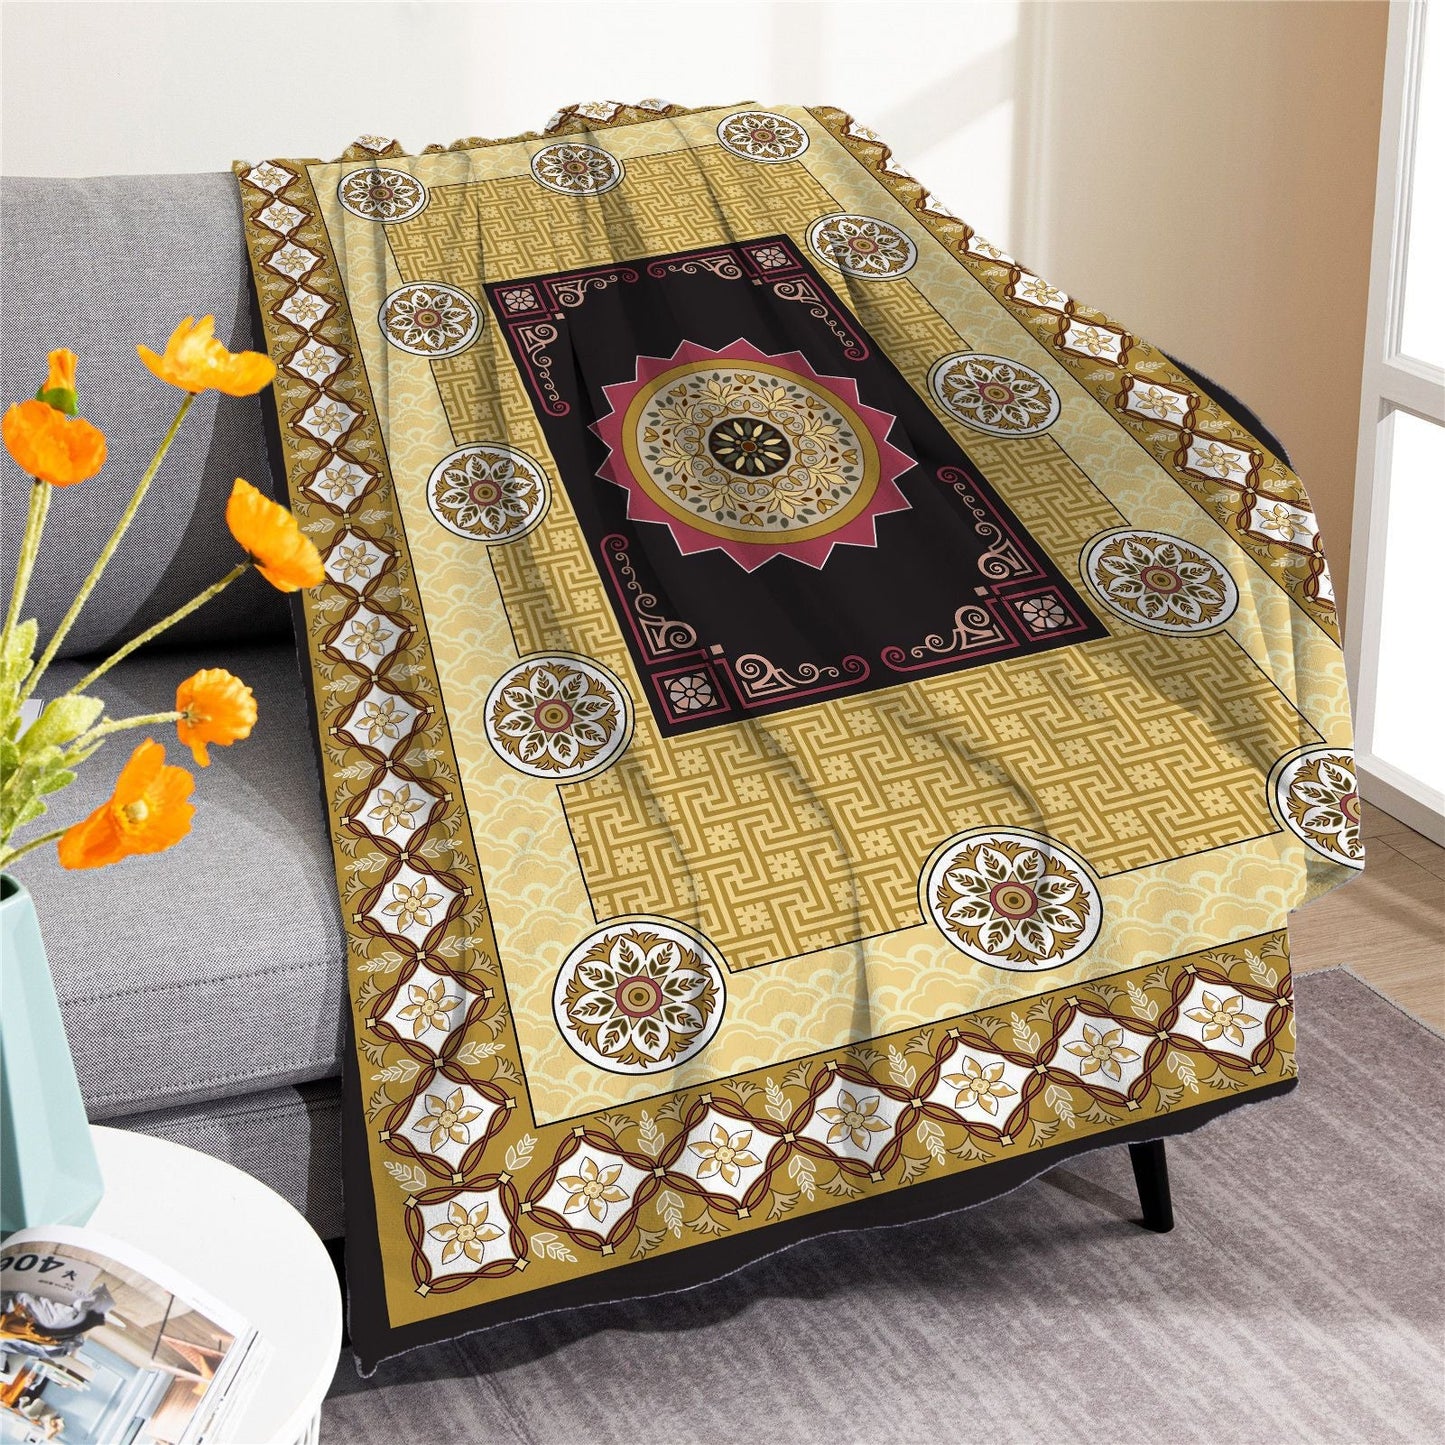 Vintage Boho Fleece Throw Blankets-Blankets-M20220701-30-50*60 Inches-Free Shipping at meselling99